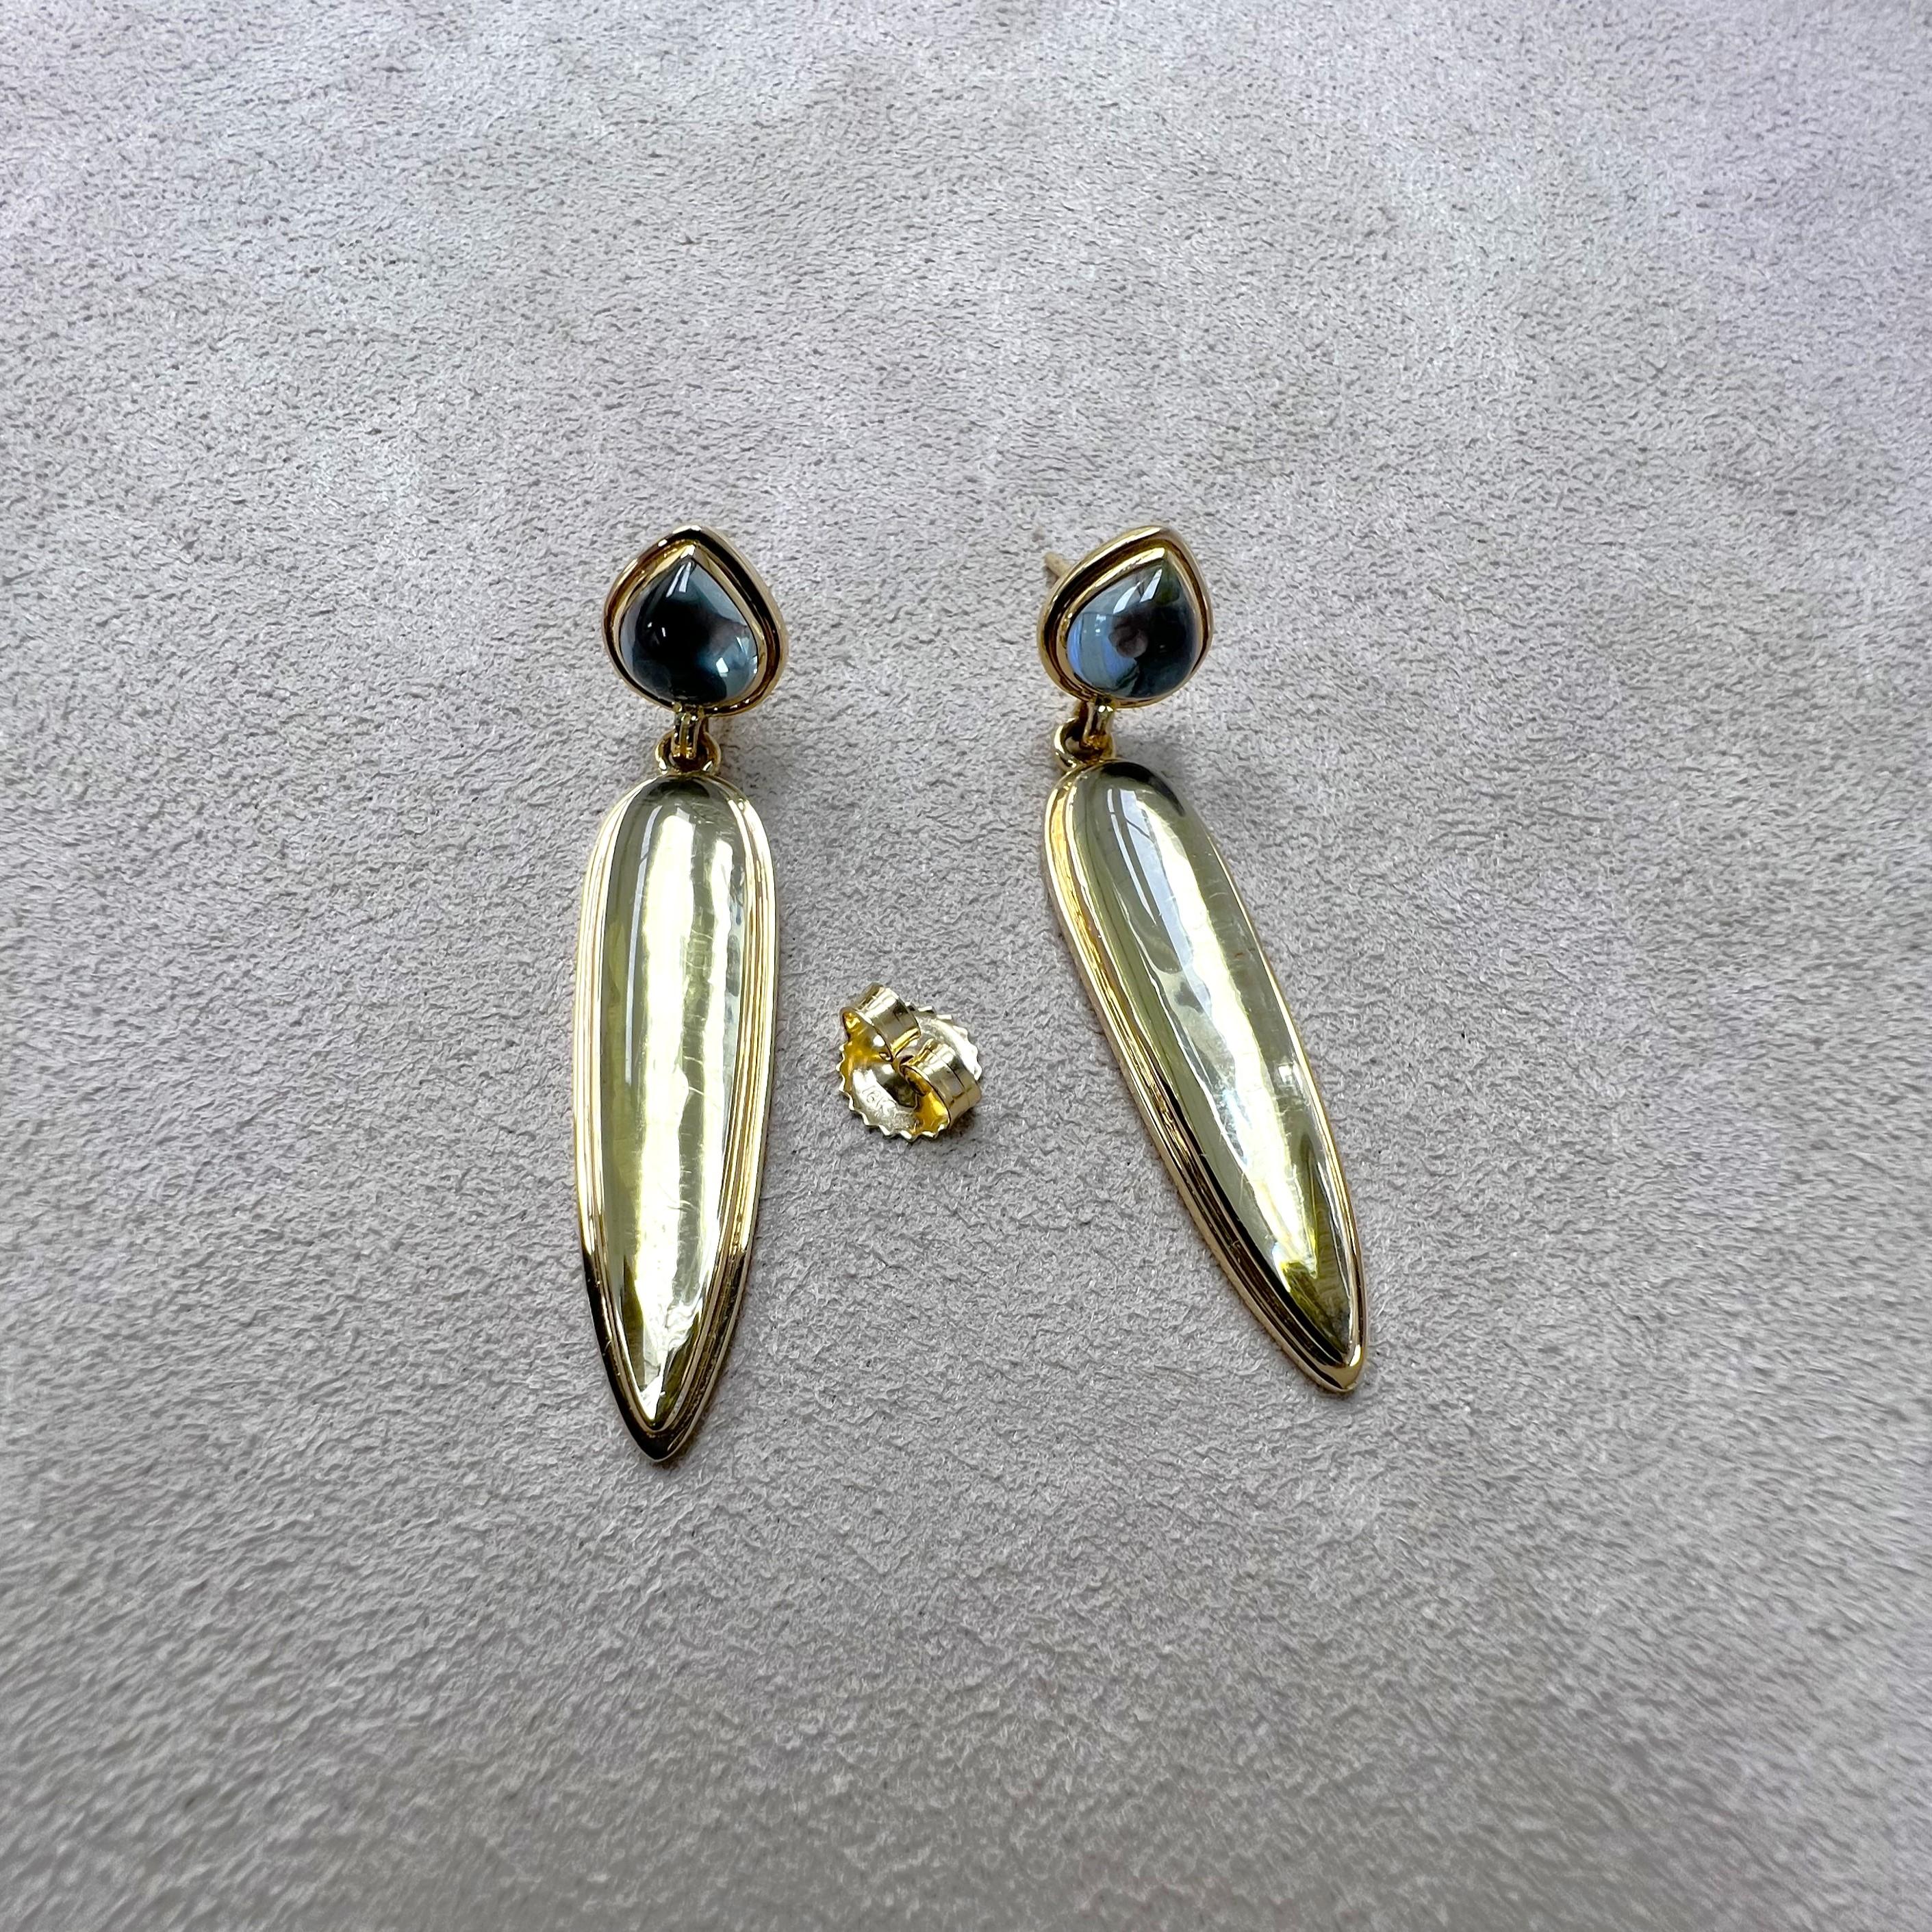 Created in 18 karat yellow gold
Blue Topaz 3 carats approx.
Lemon Quartz 12.50 carats approx.
18kyg post backs for pierced ears


About the Designers

Drawing inspiration from little things, Dharmesh & Namrata Kothari have created an extraordinary